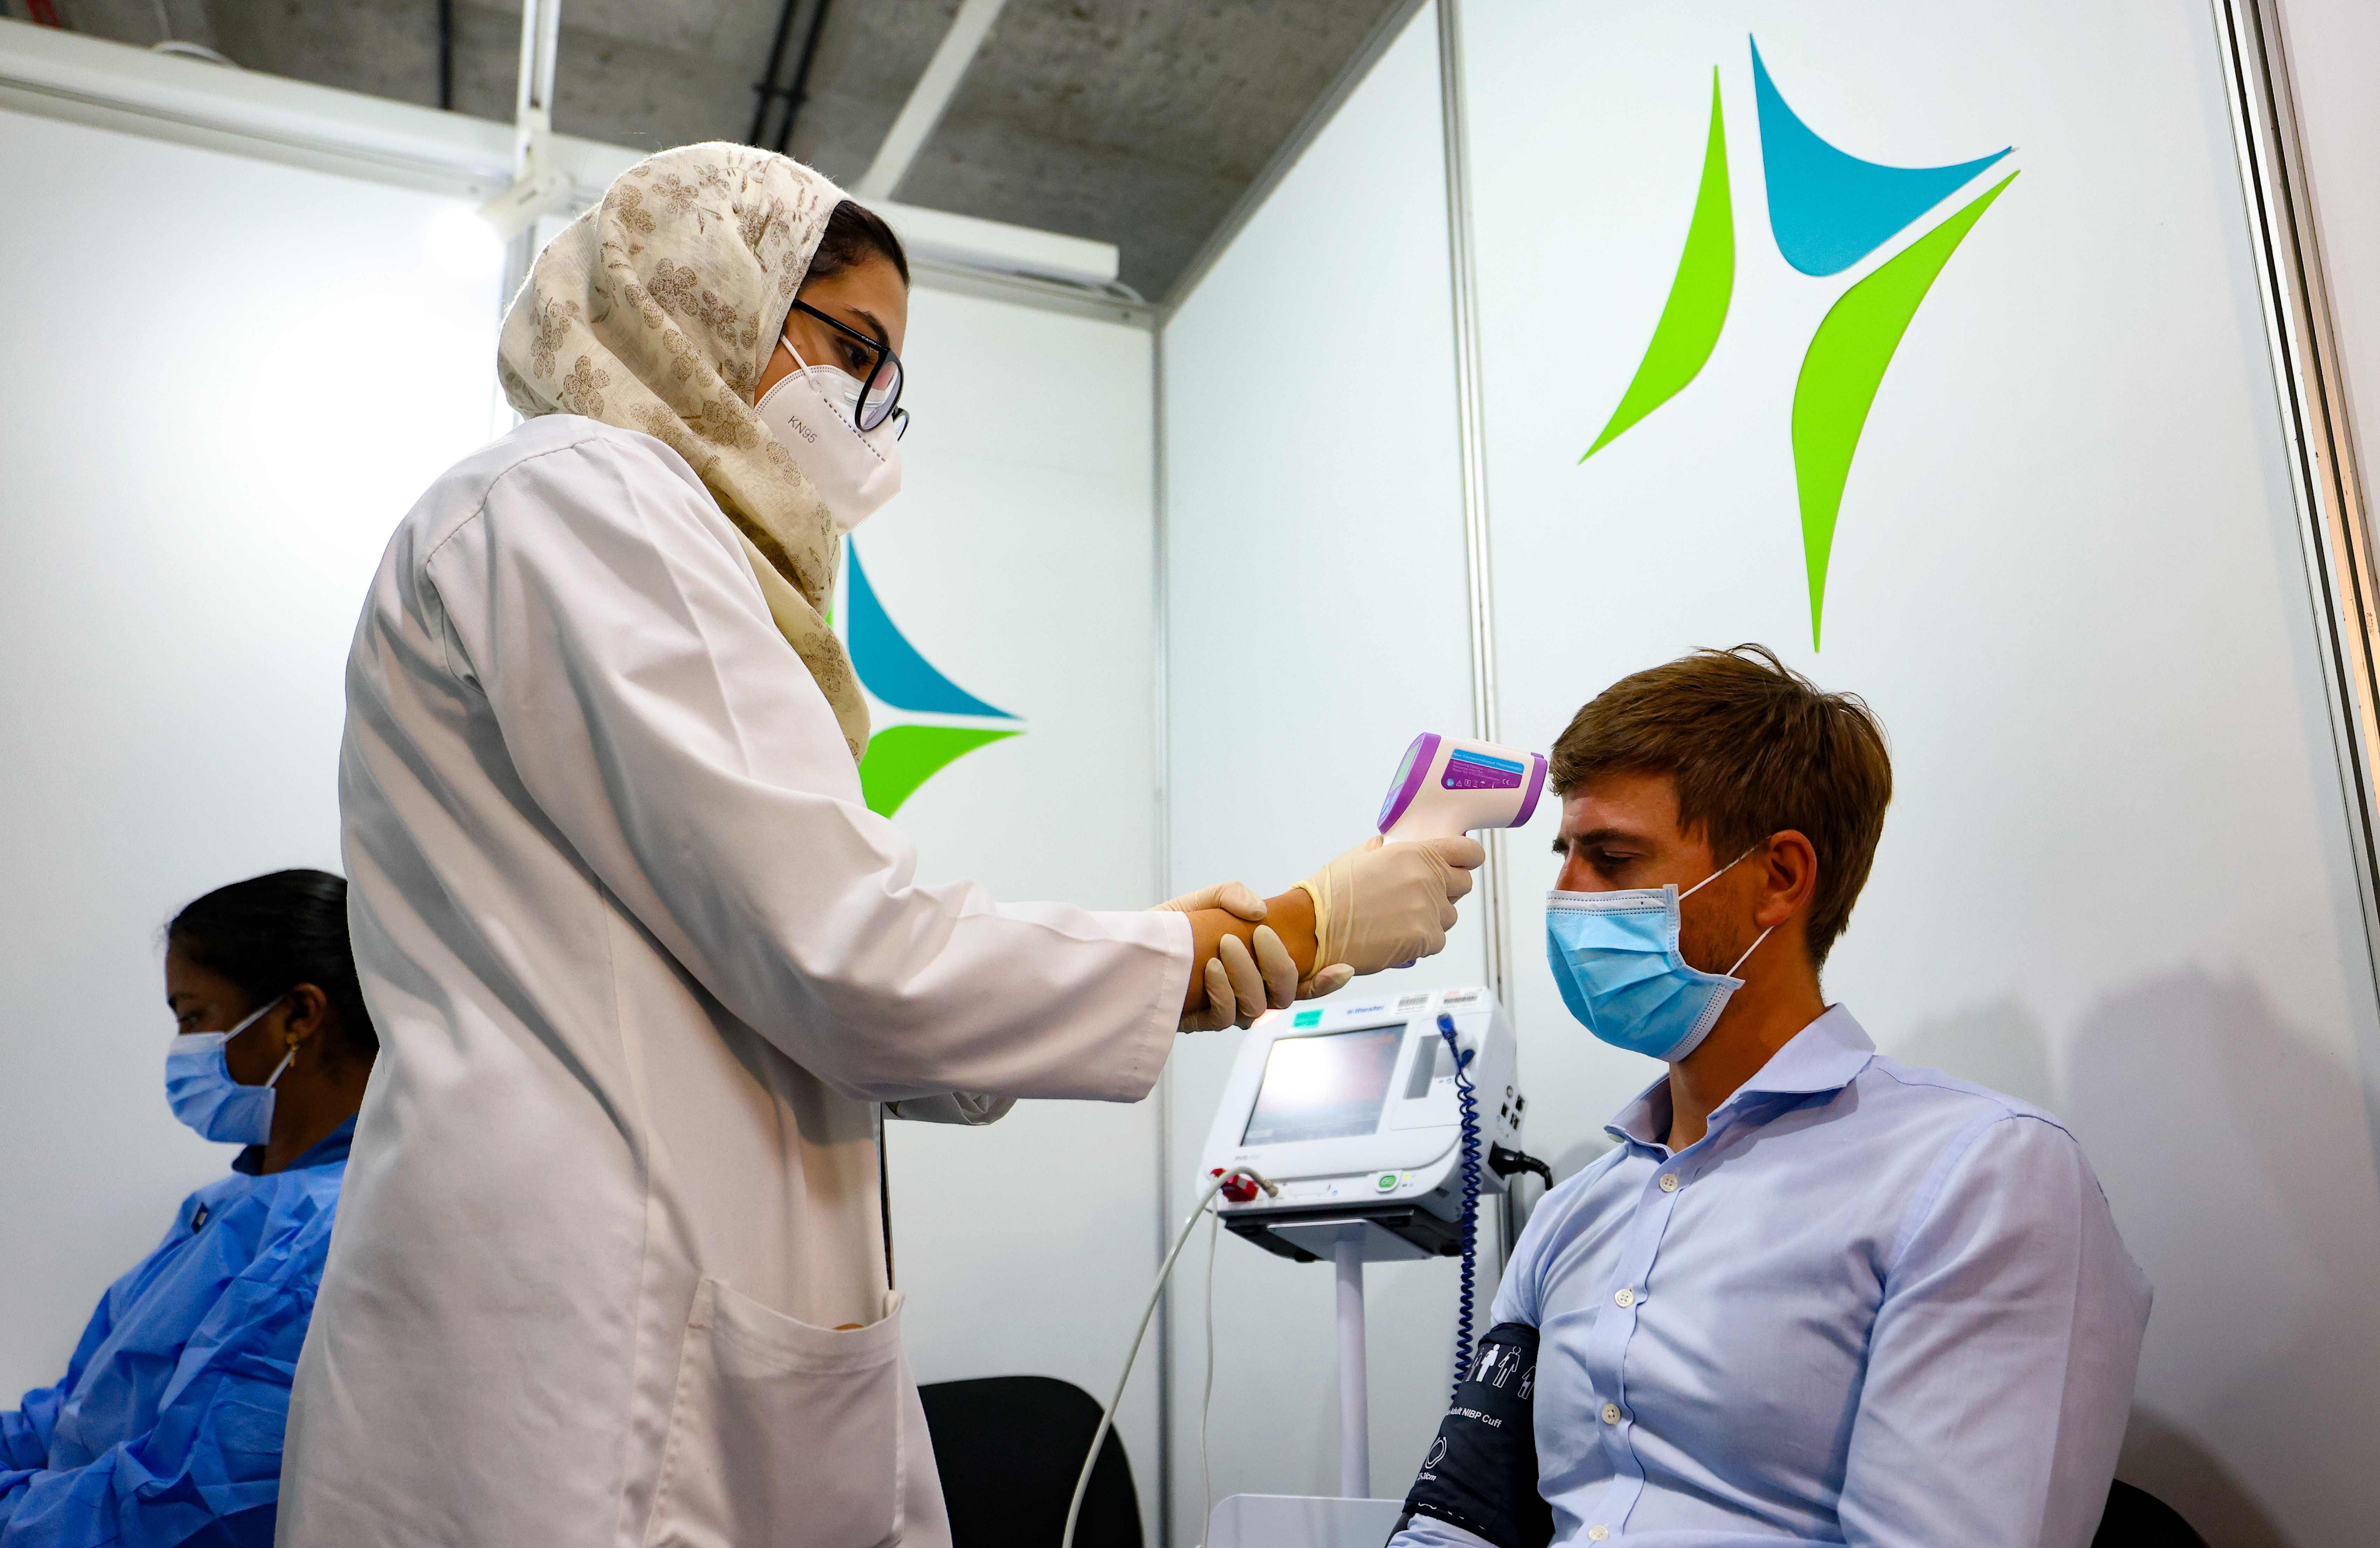 A health worker checks a man's temperature before receiving a dose of vaccine against the coronavirus at a vaccination centre set up at the Dubai International Financial Center in the Gulf emirate of Dubai, on February 3, 2021. - The United Arab Emirates, which includes Dubai and six other emirates, has suffered a spike in cases after the holiday period. It was among the first to launch a vast vaccination campaign in December 2020 for its population of nearly 10 million and has administered at least three million doses to more than a quarter of its population, second only to Israel in the global race, according to the German data agency Statista. Credit: AFP Photo